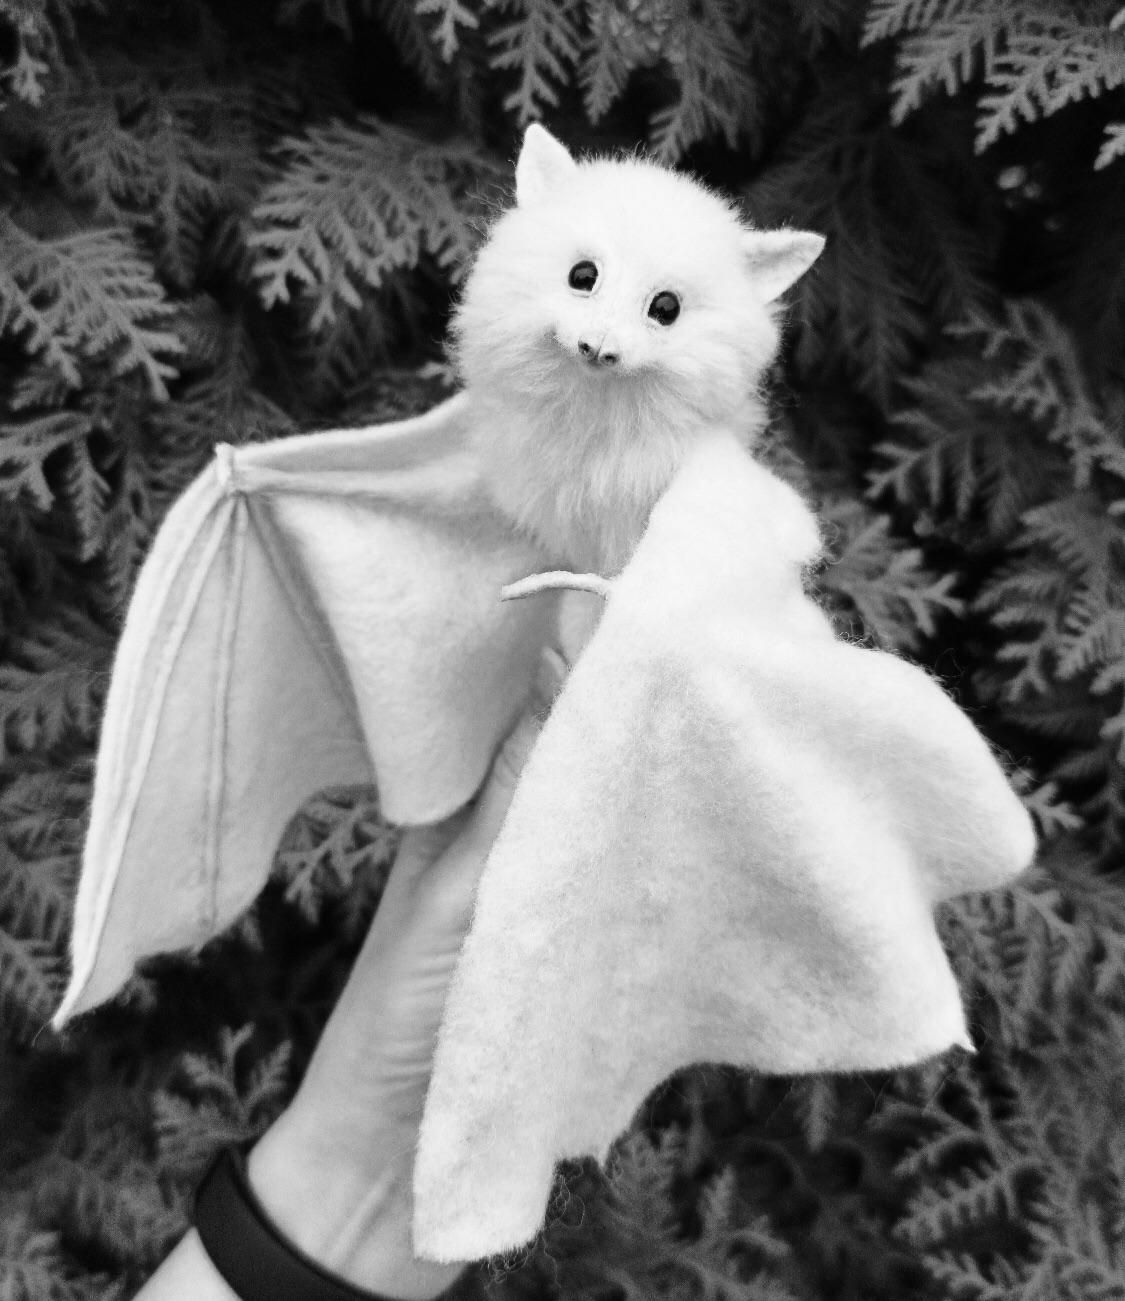 One of the last photos of the now extinct Needle Felted Bat